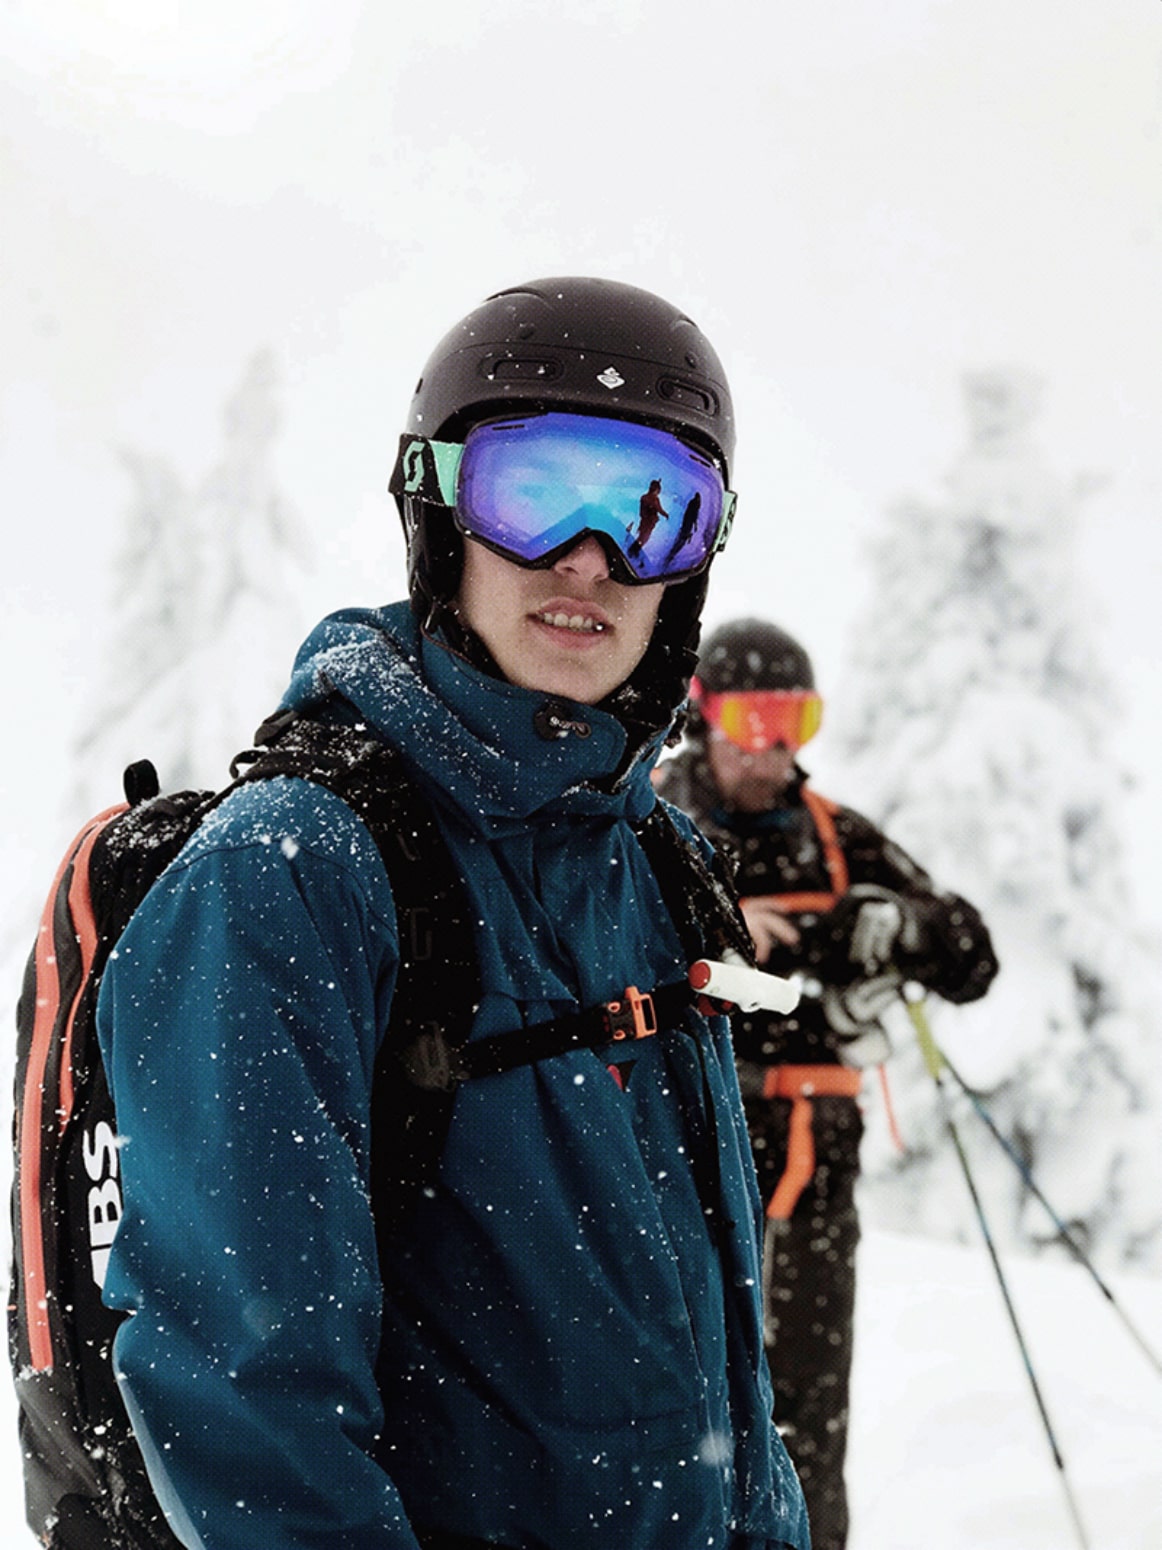 Skier with Goggles